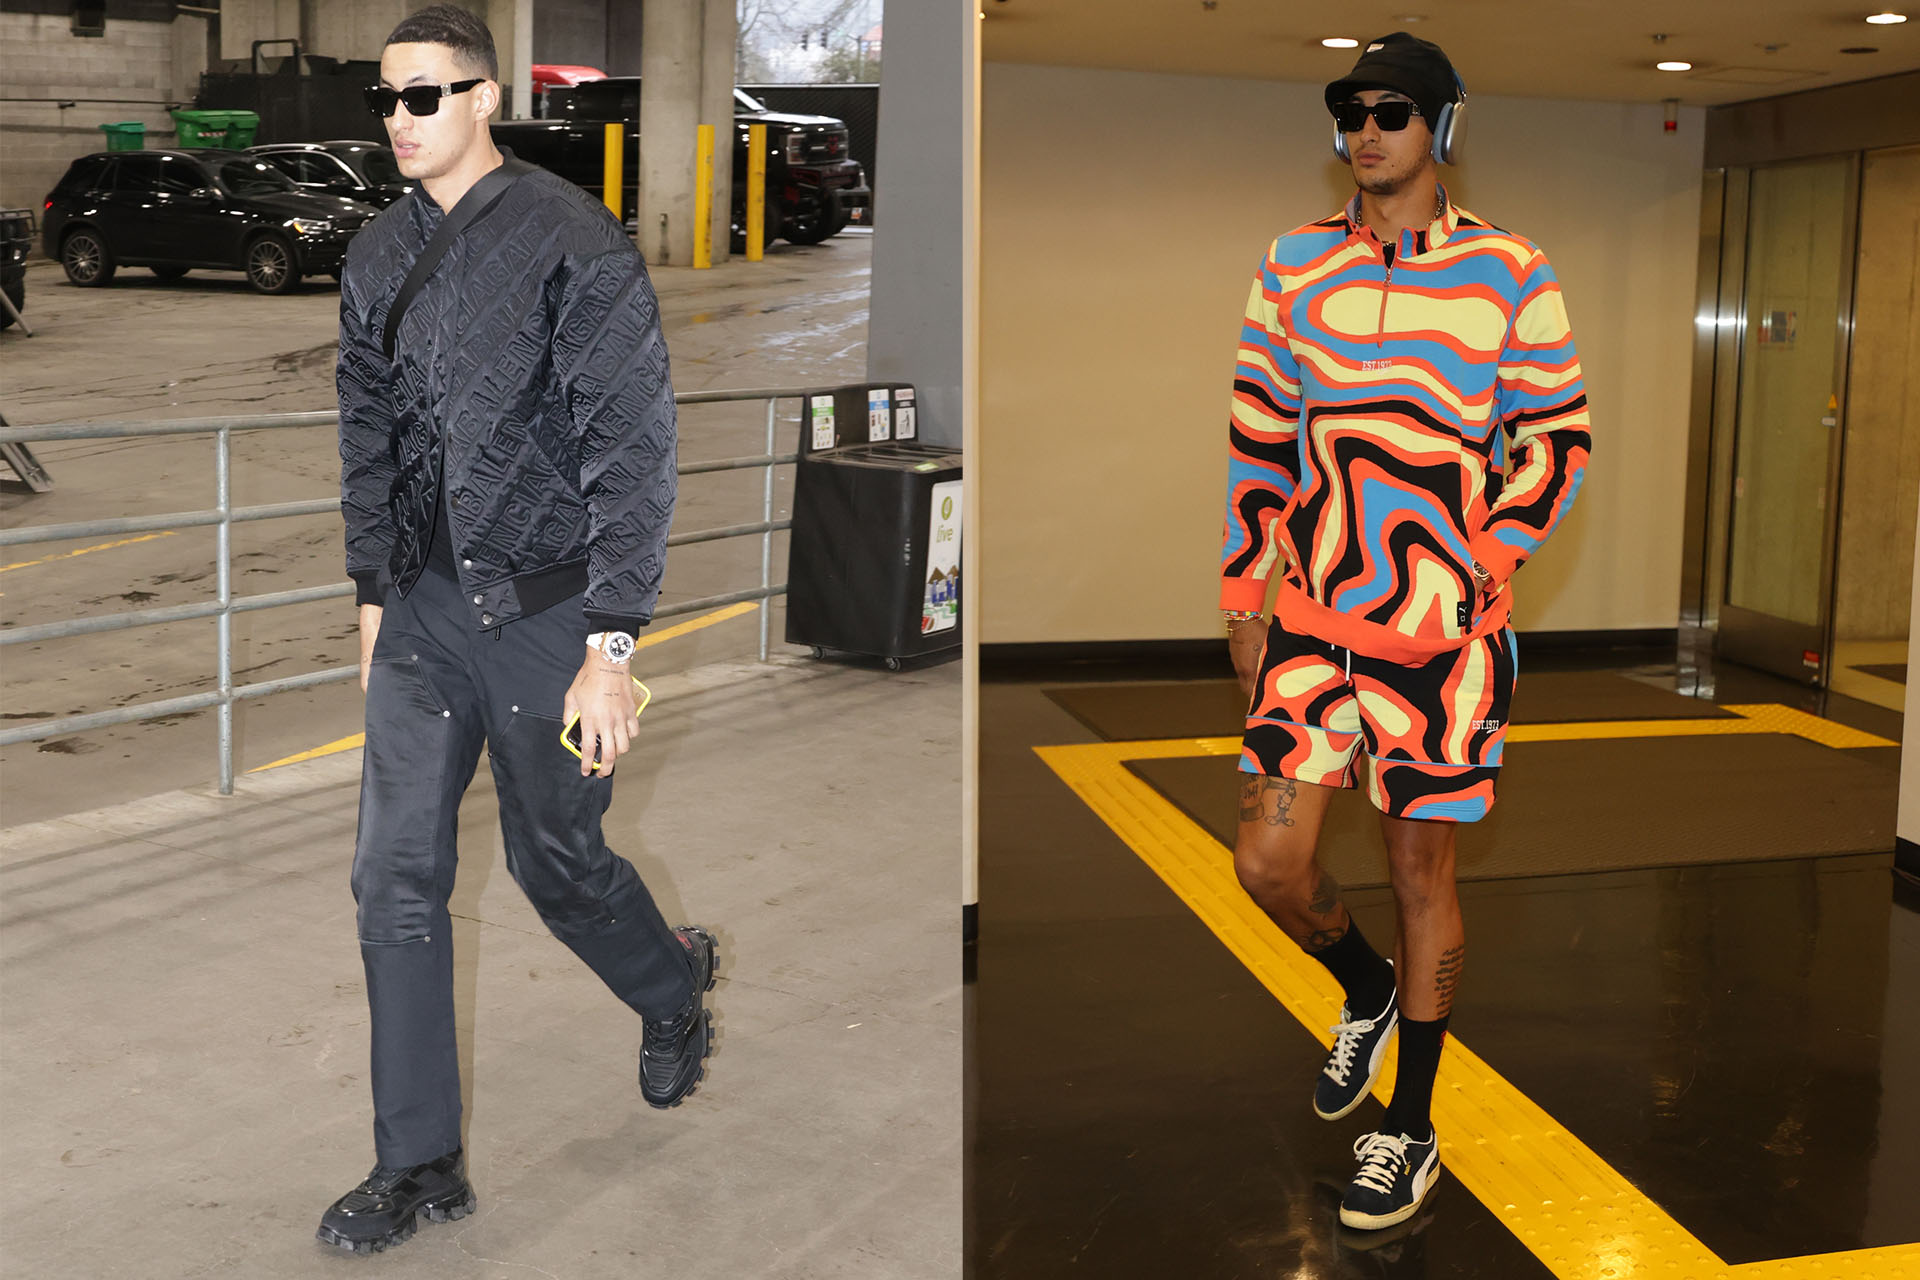 15 Best Dressed Basketball Players - NBA's Best Dressed Players